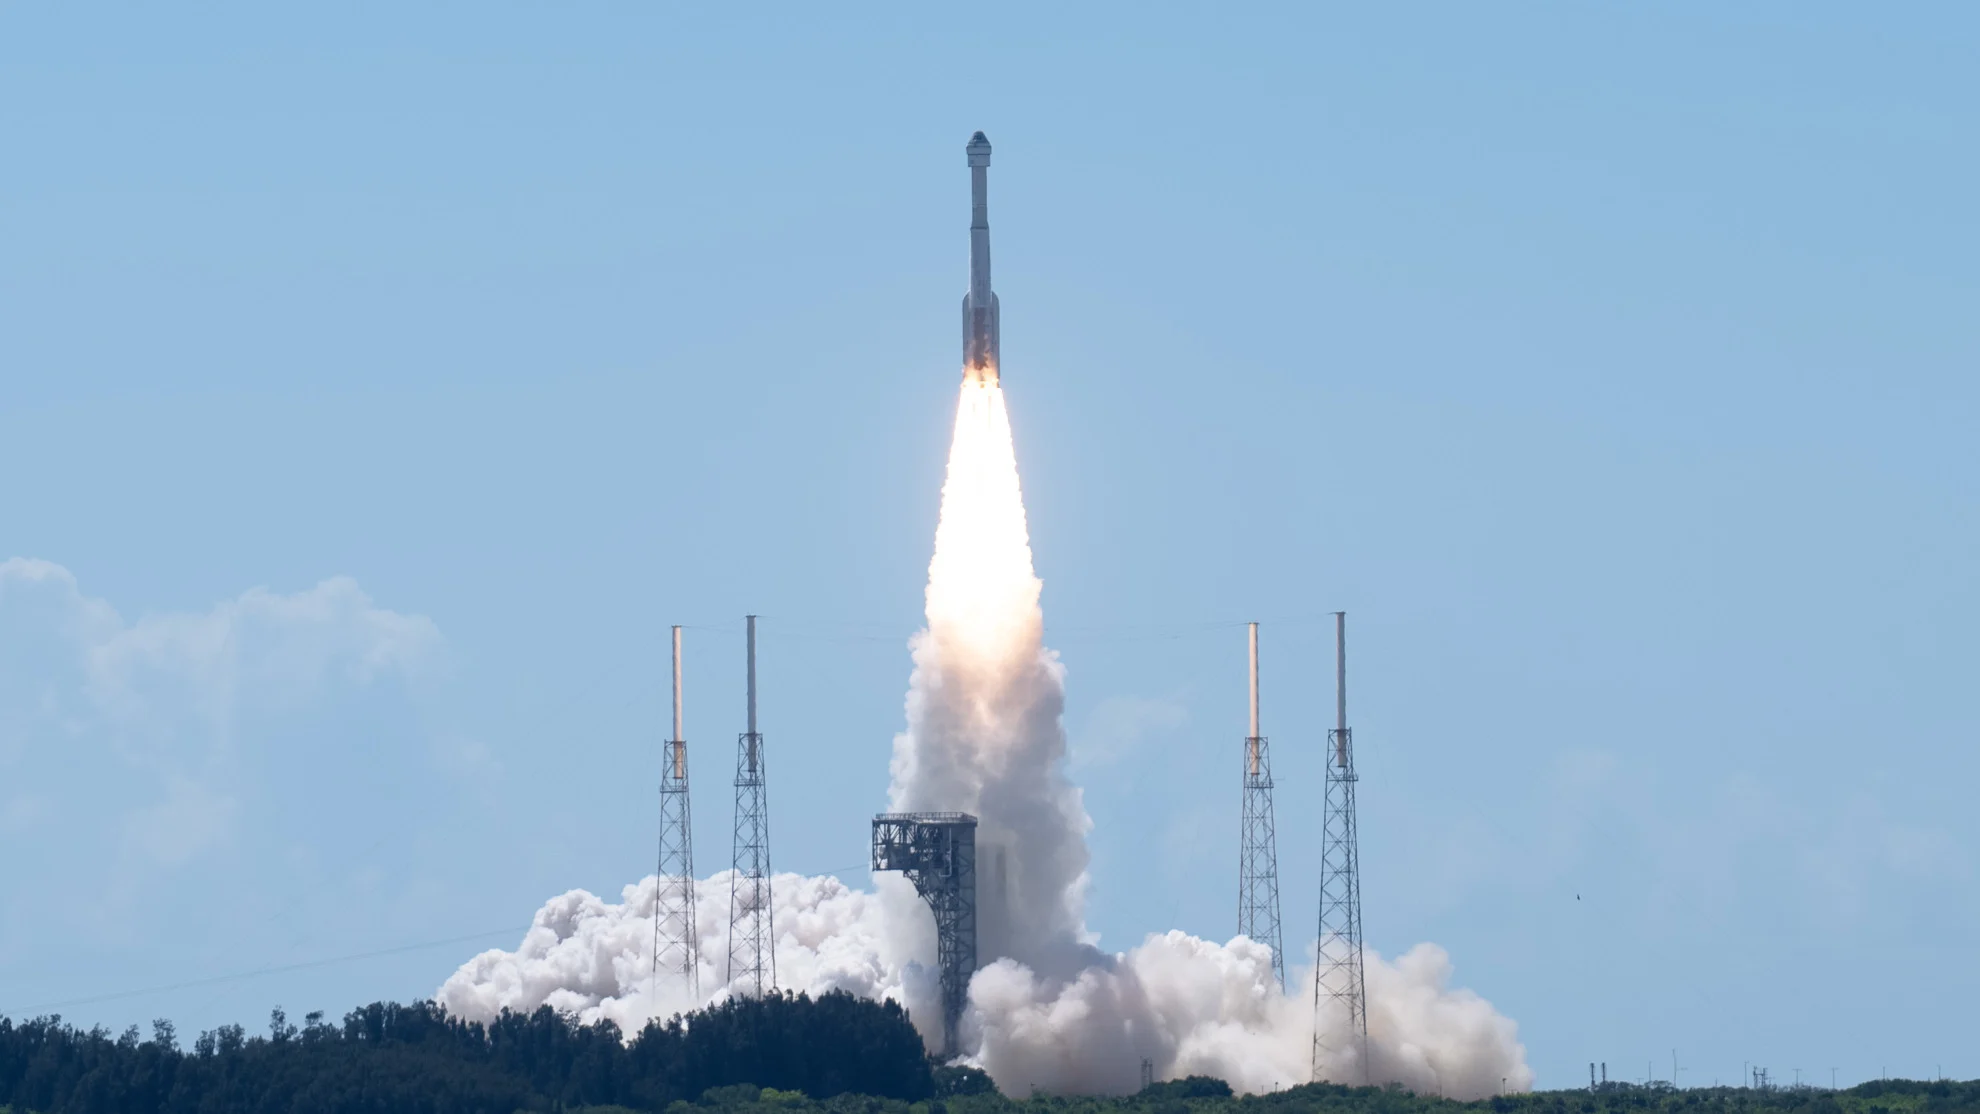 Boeing Starliner lifts off on first crewed test flight to the space station